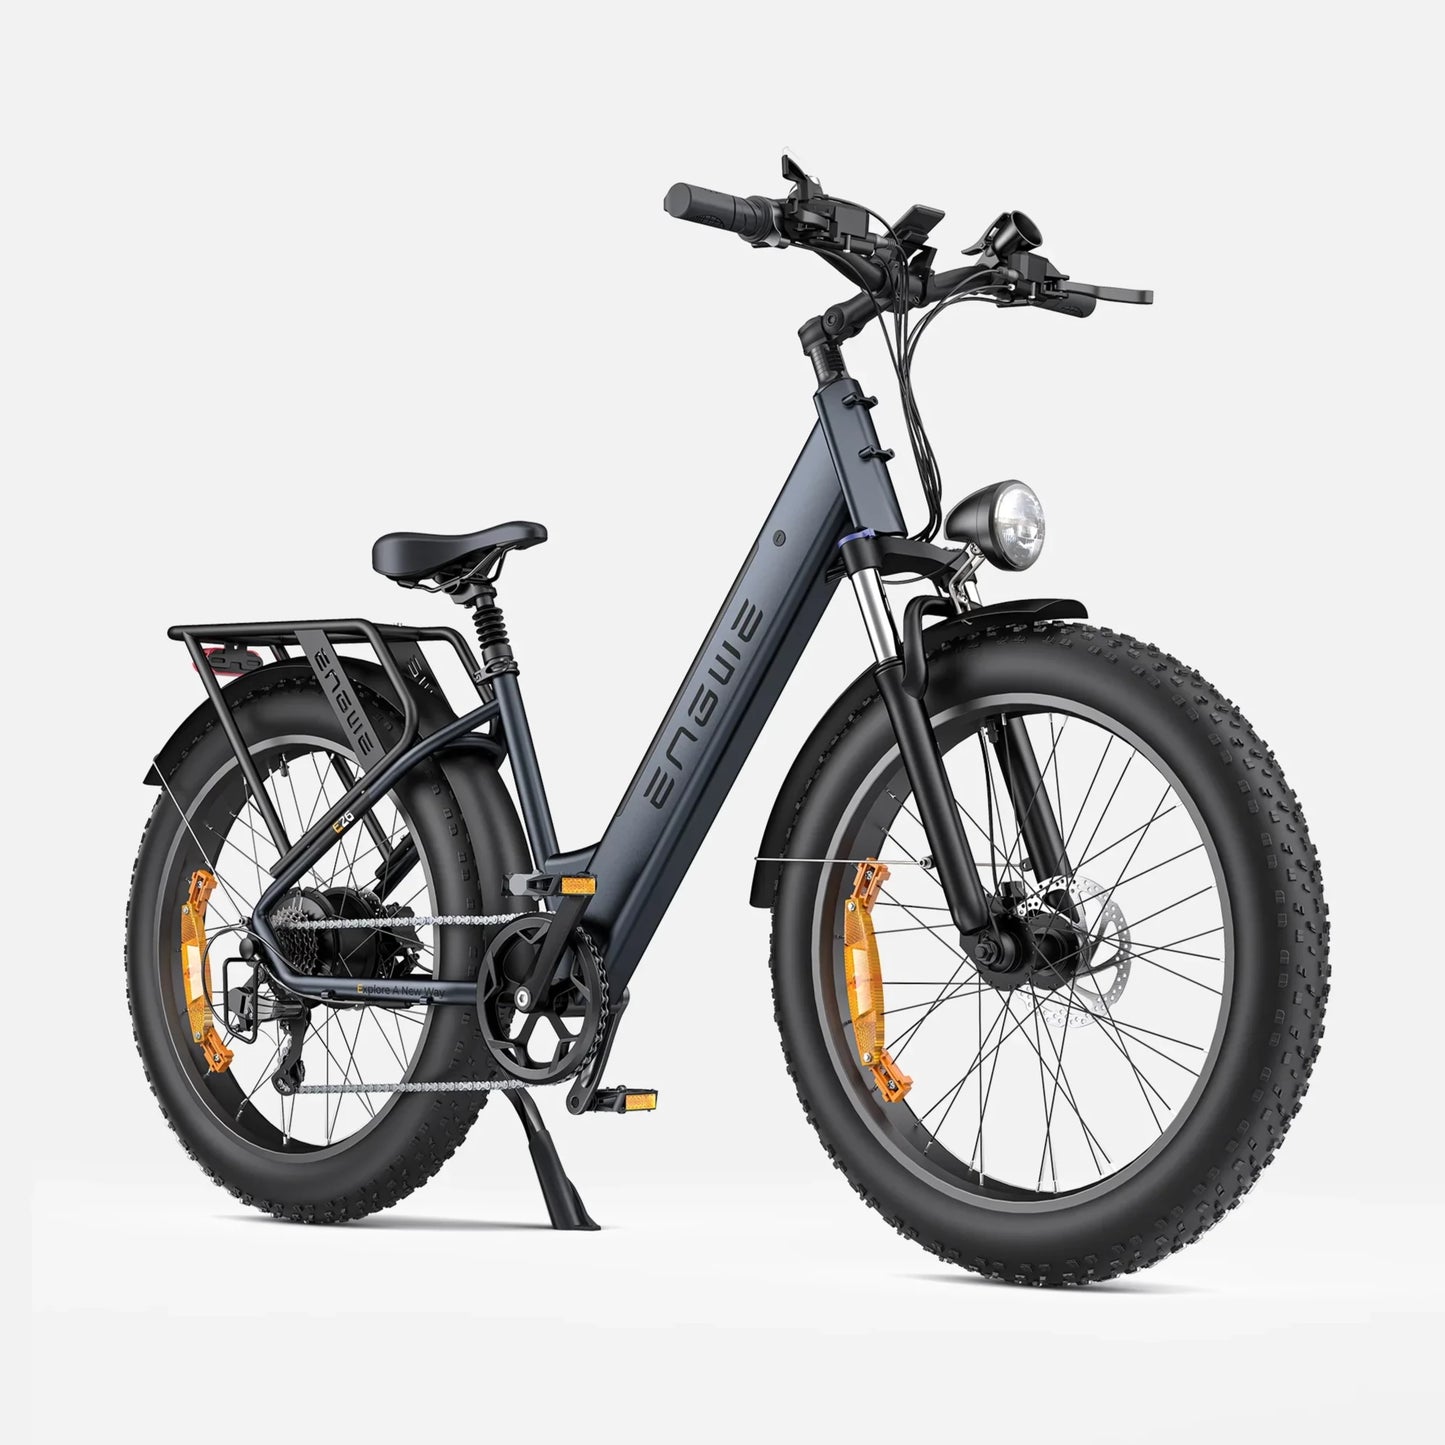 ENGWE E26 ST 250W Electric Bicycle